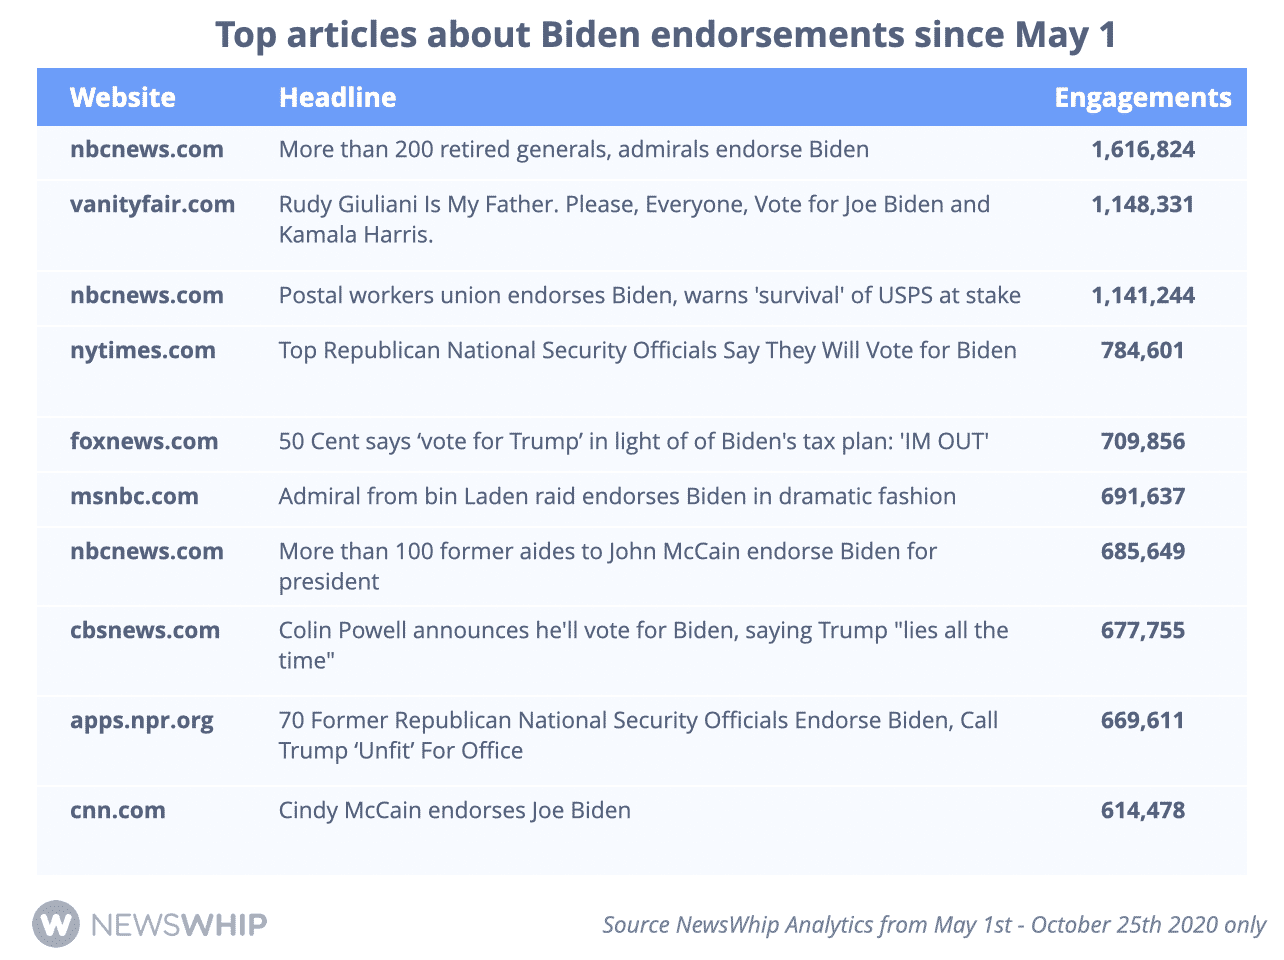 Chart showing the most engaged stories about Joe Biden endorsements in 2020, ranked by engagement